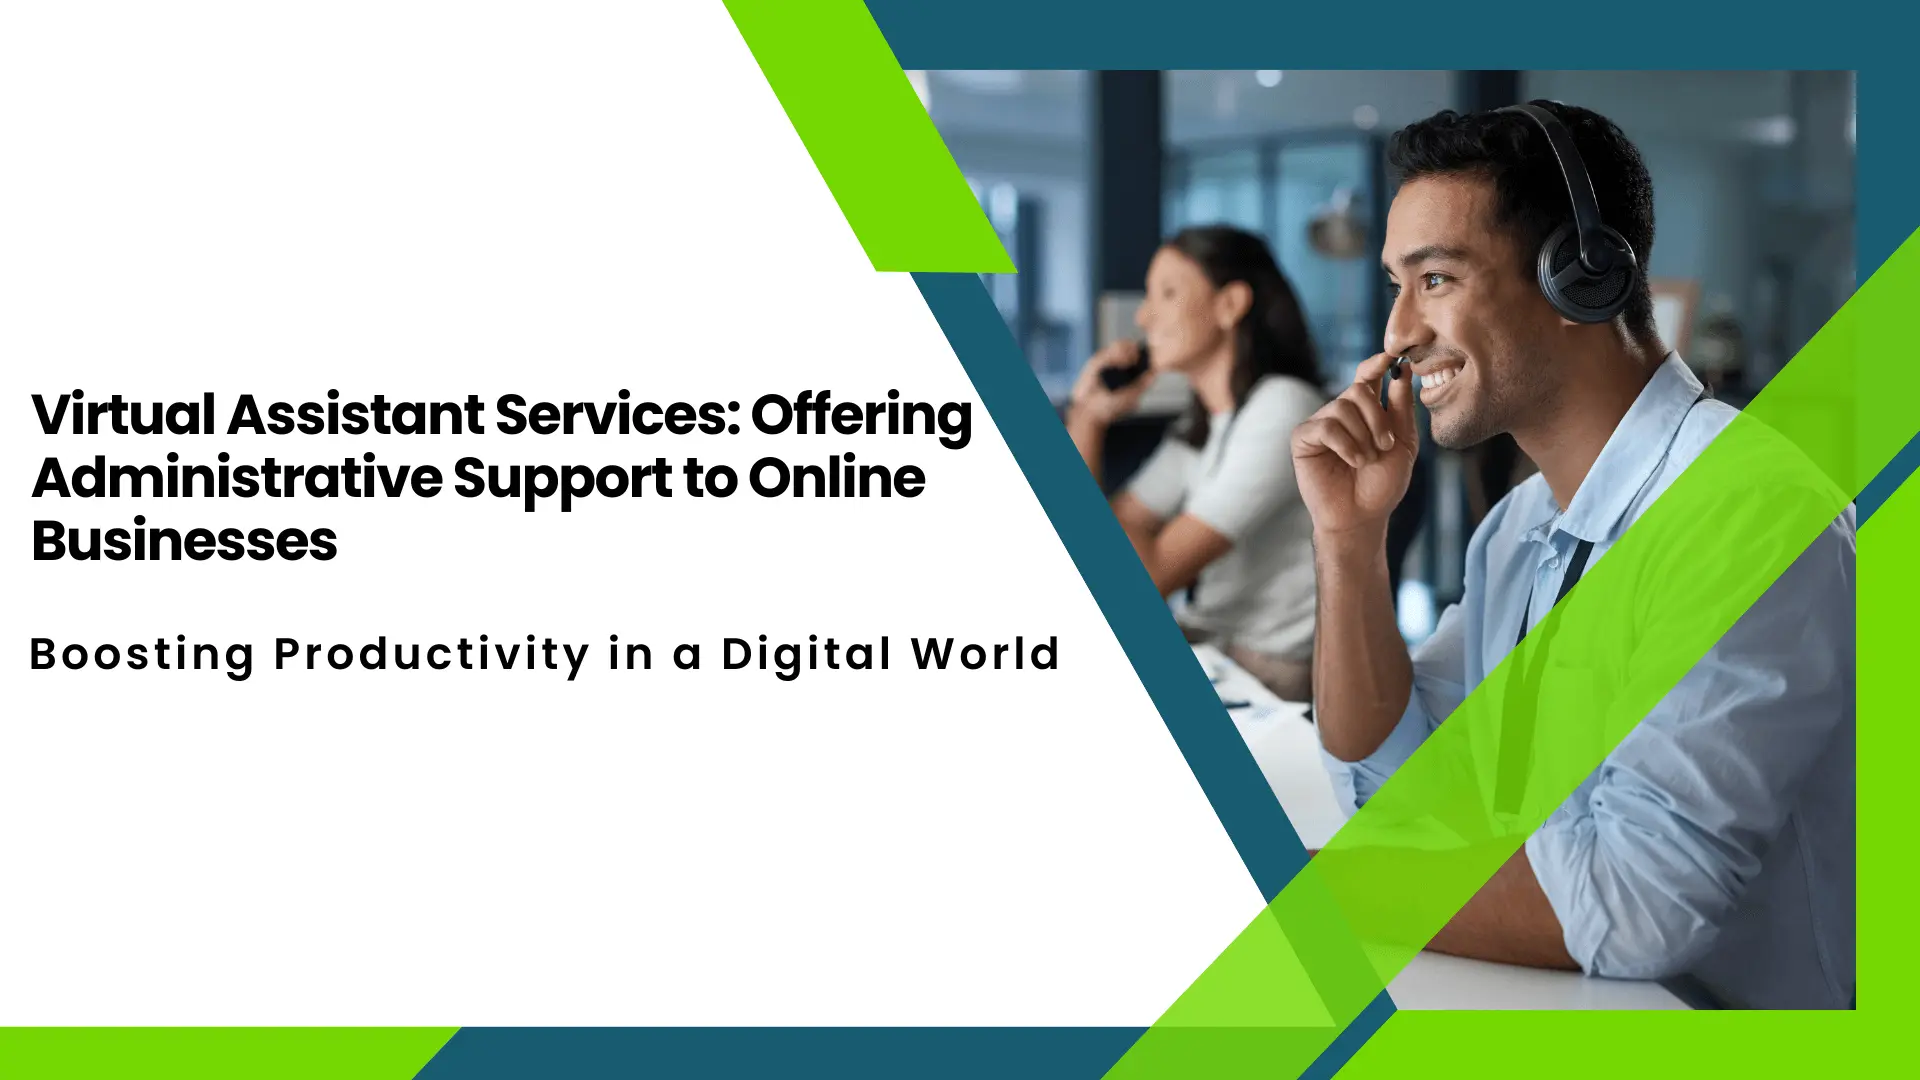 Virtual Assistant Services Offering Administrative Support to Online Businesses